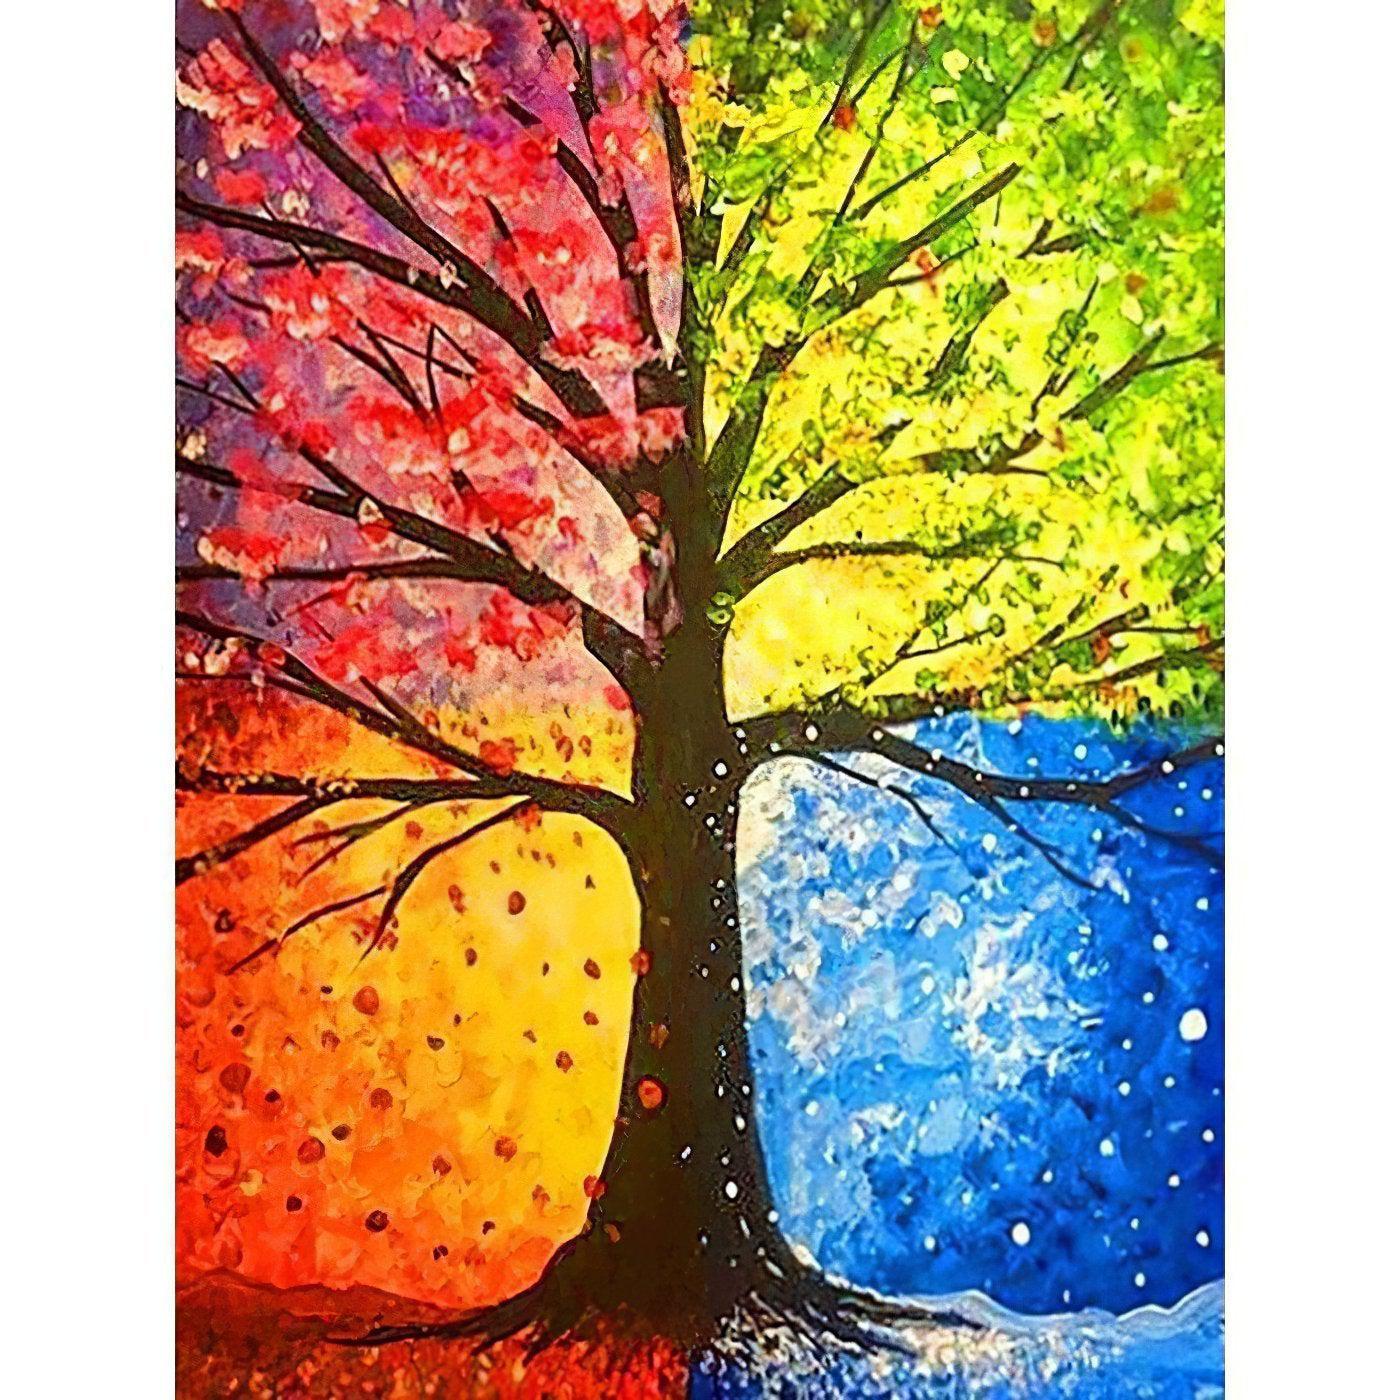 Nature's palette comes alive in the vibrant meeting of lush greenery and rainbow Beautiful Tree And Rainbow - Diamondartlove